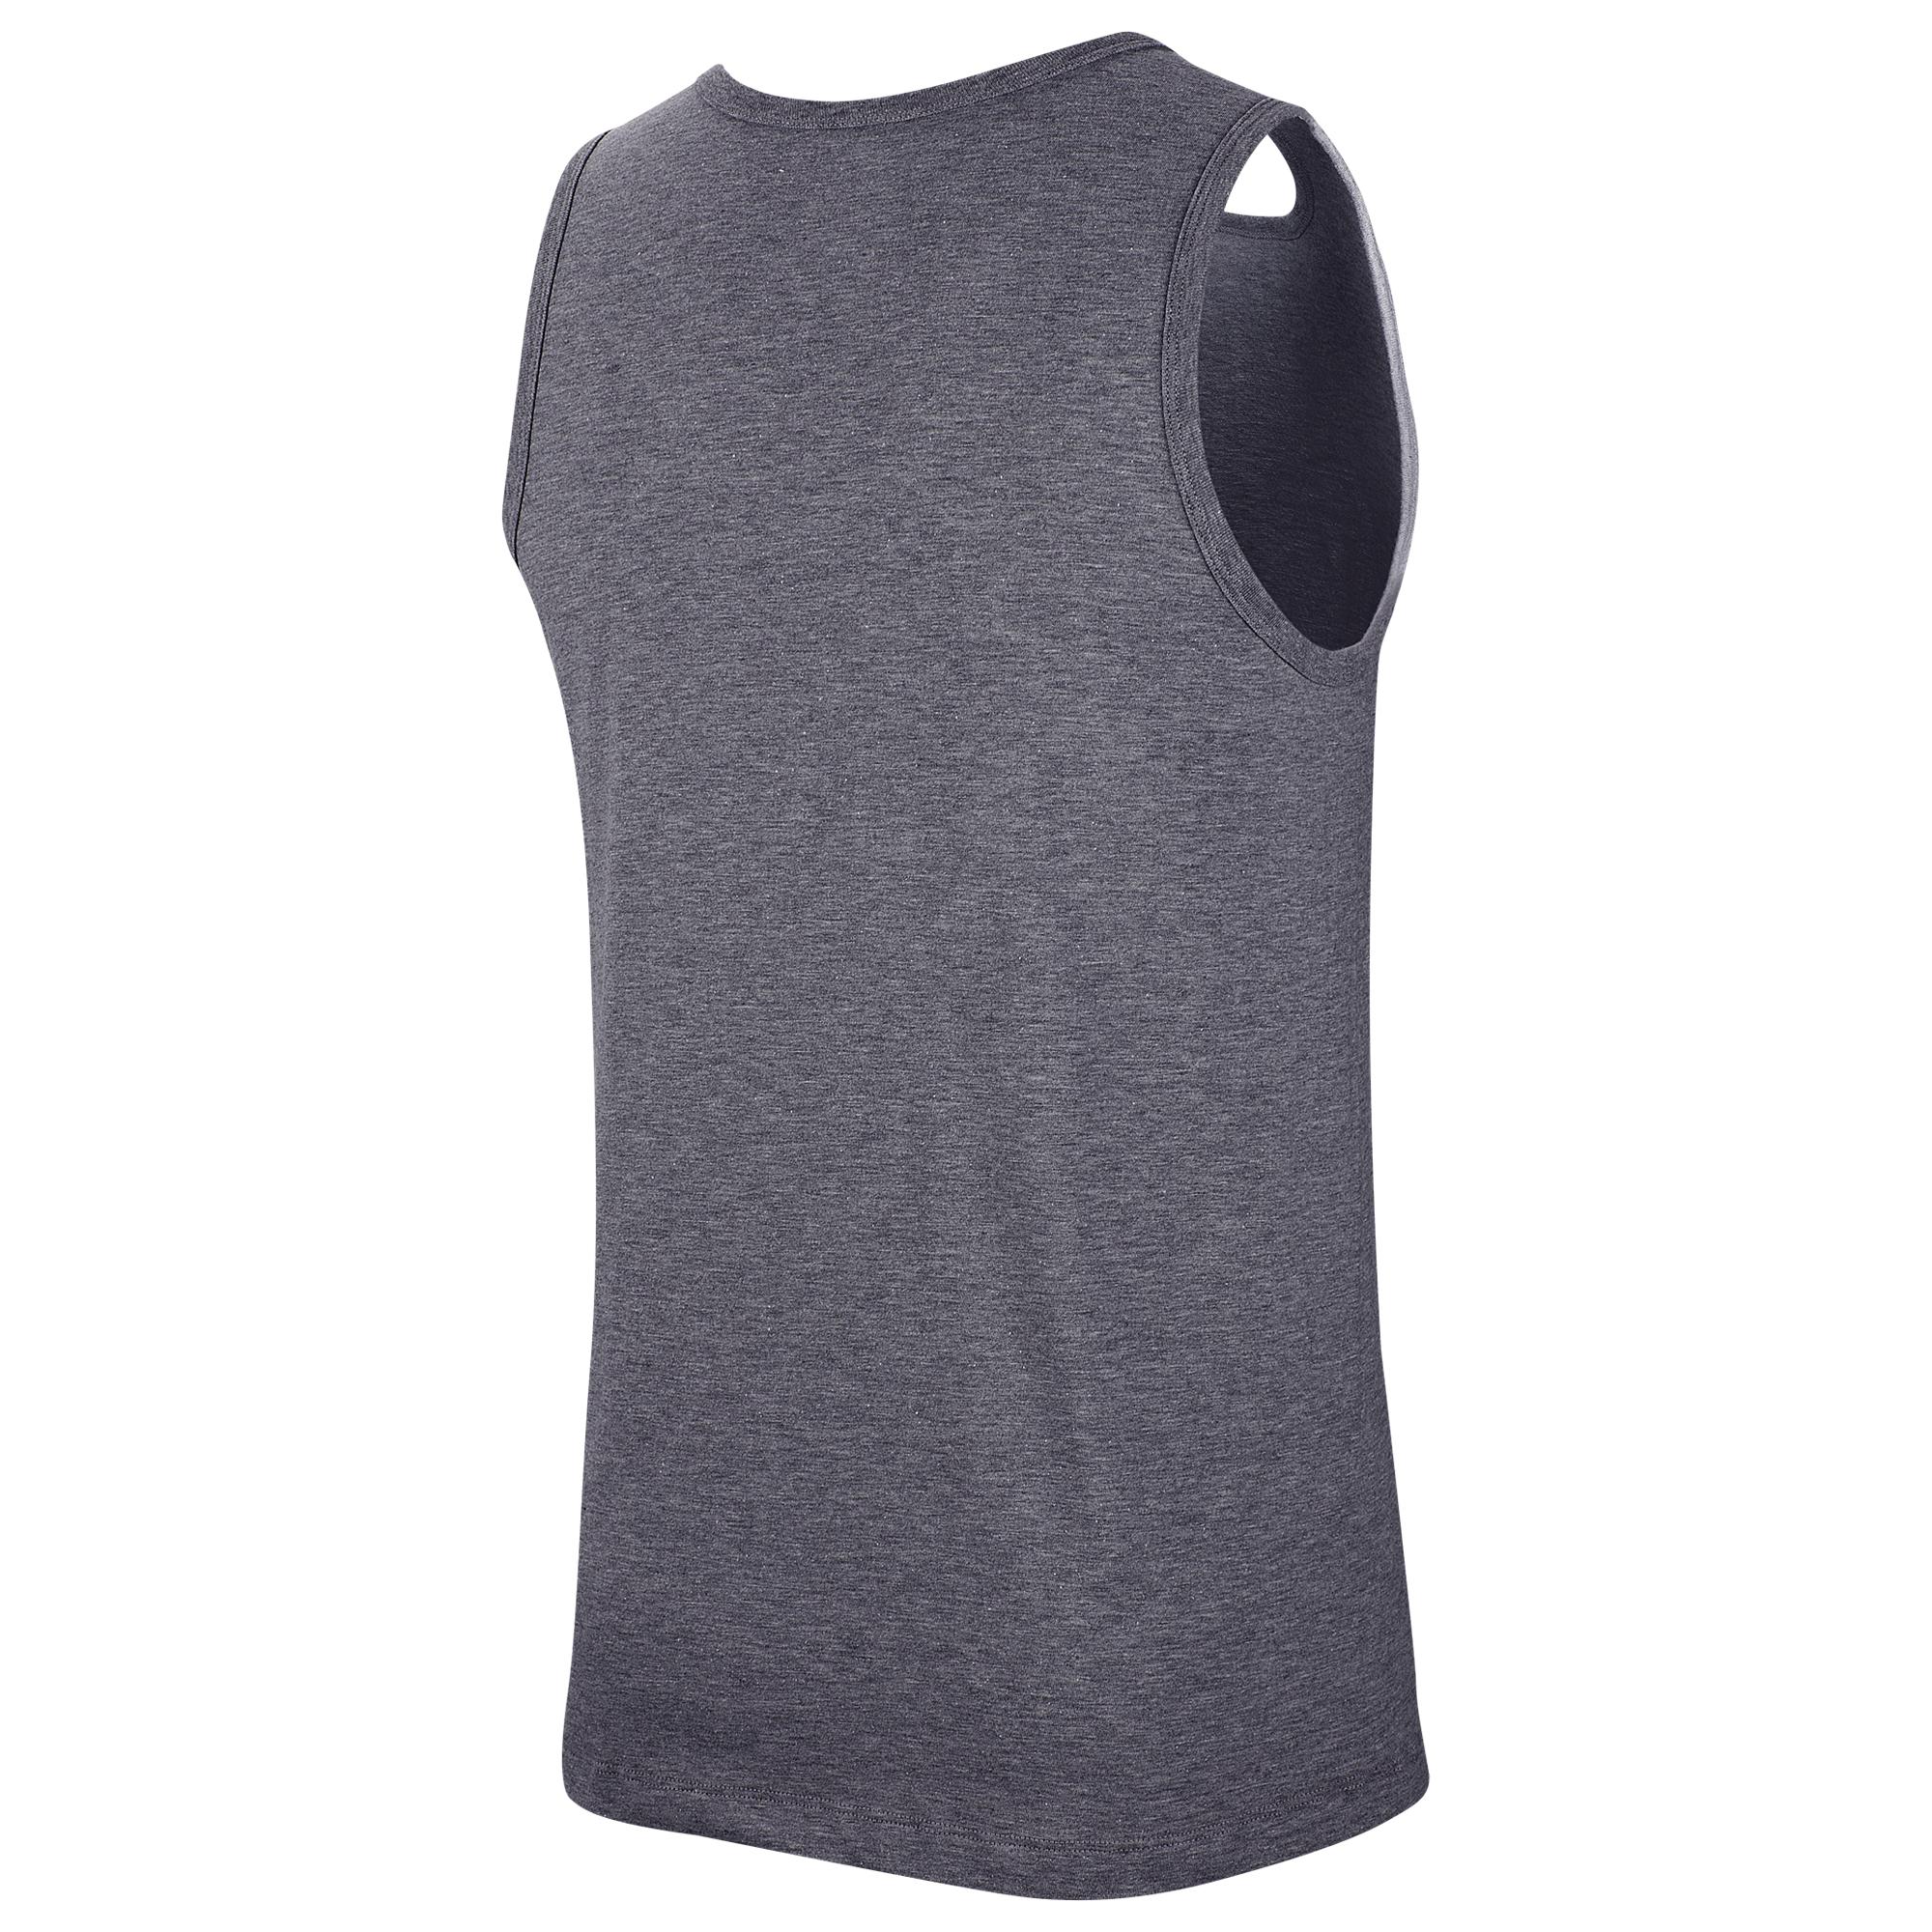 Nike Embroidered Futura Tank Top in Gray for Men - Lyst